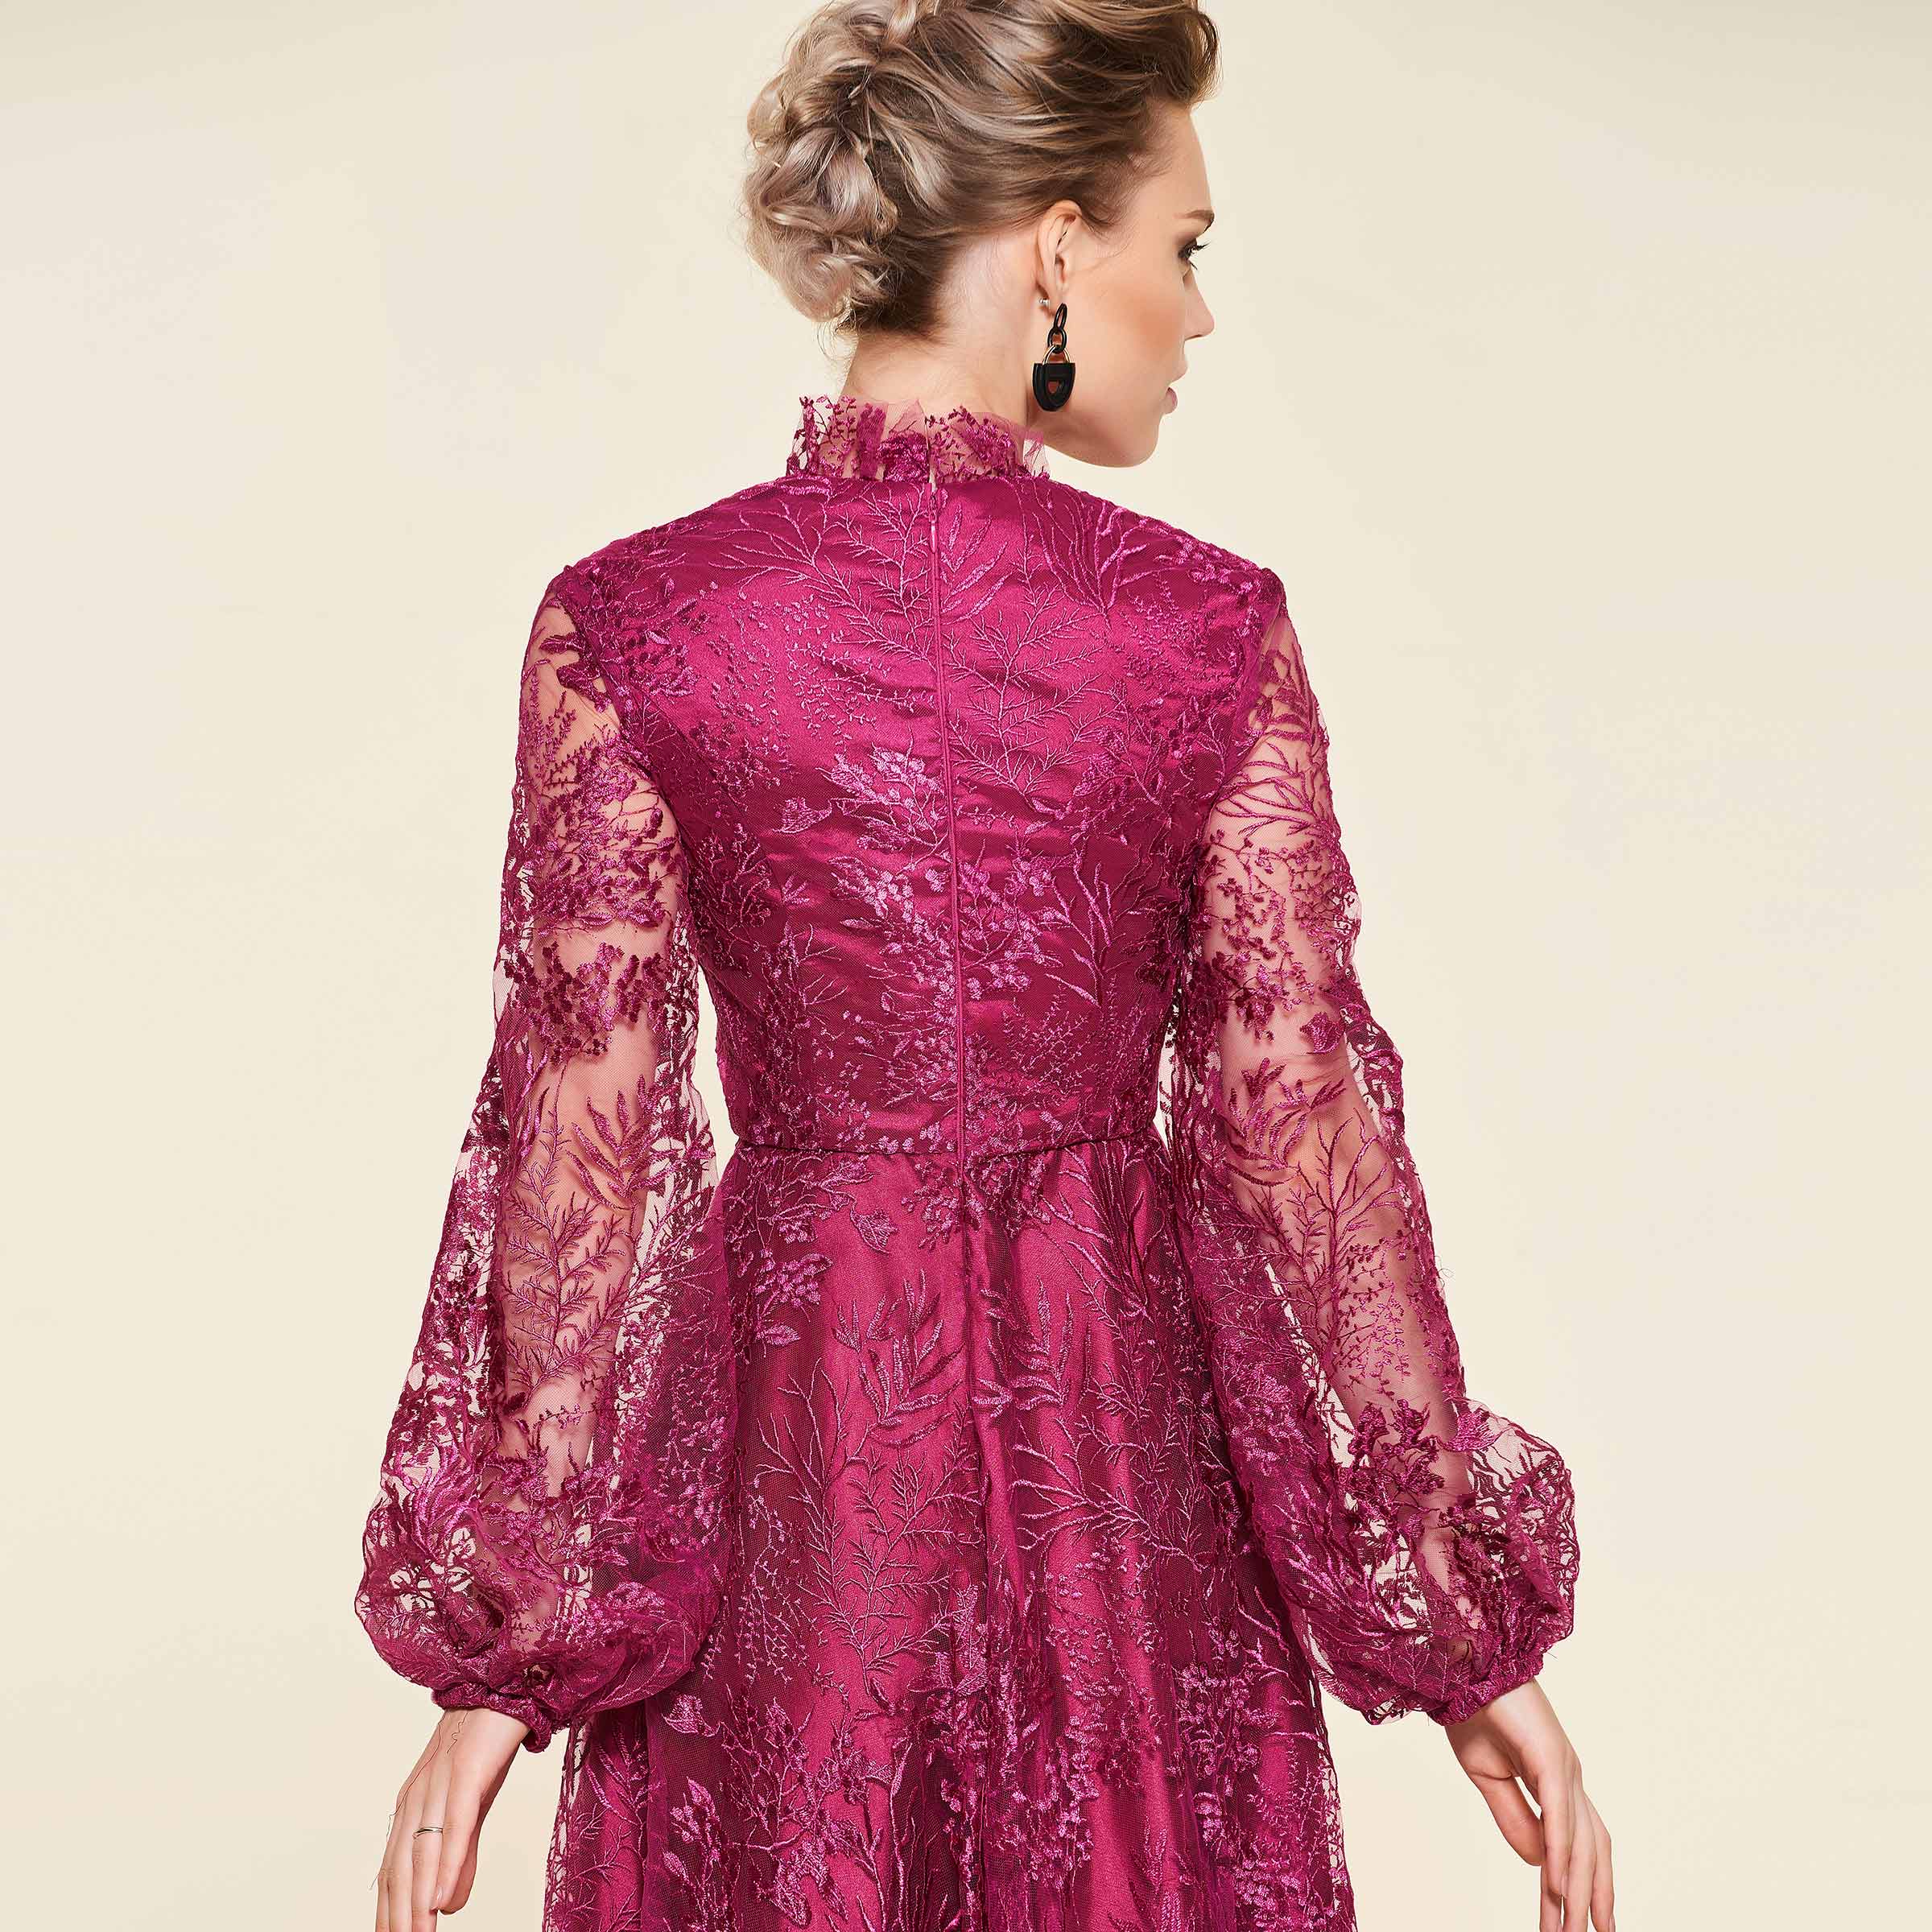 Ericdress V-Neck Long Sleeve Lace Mother of the Bride Dress